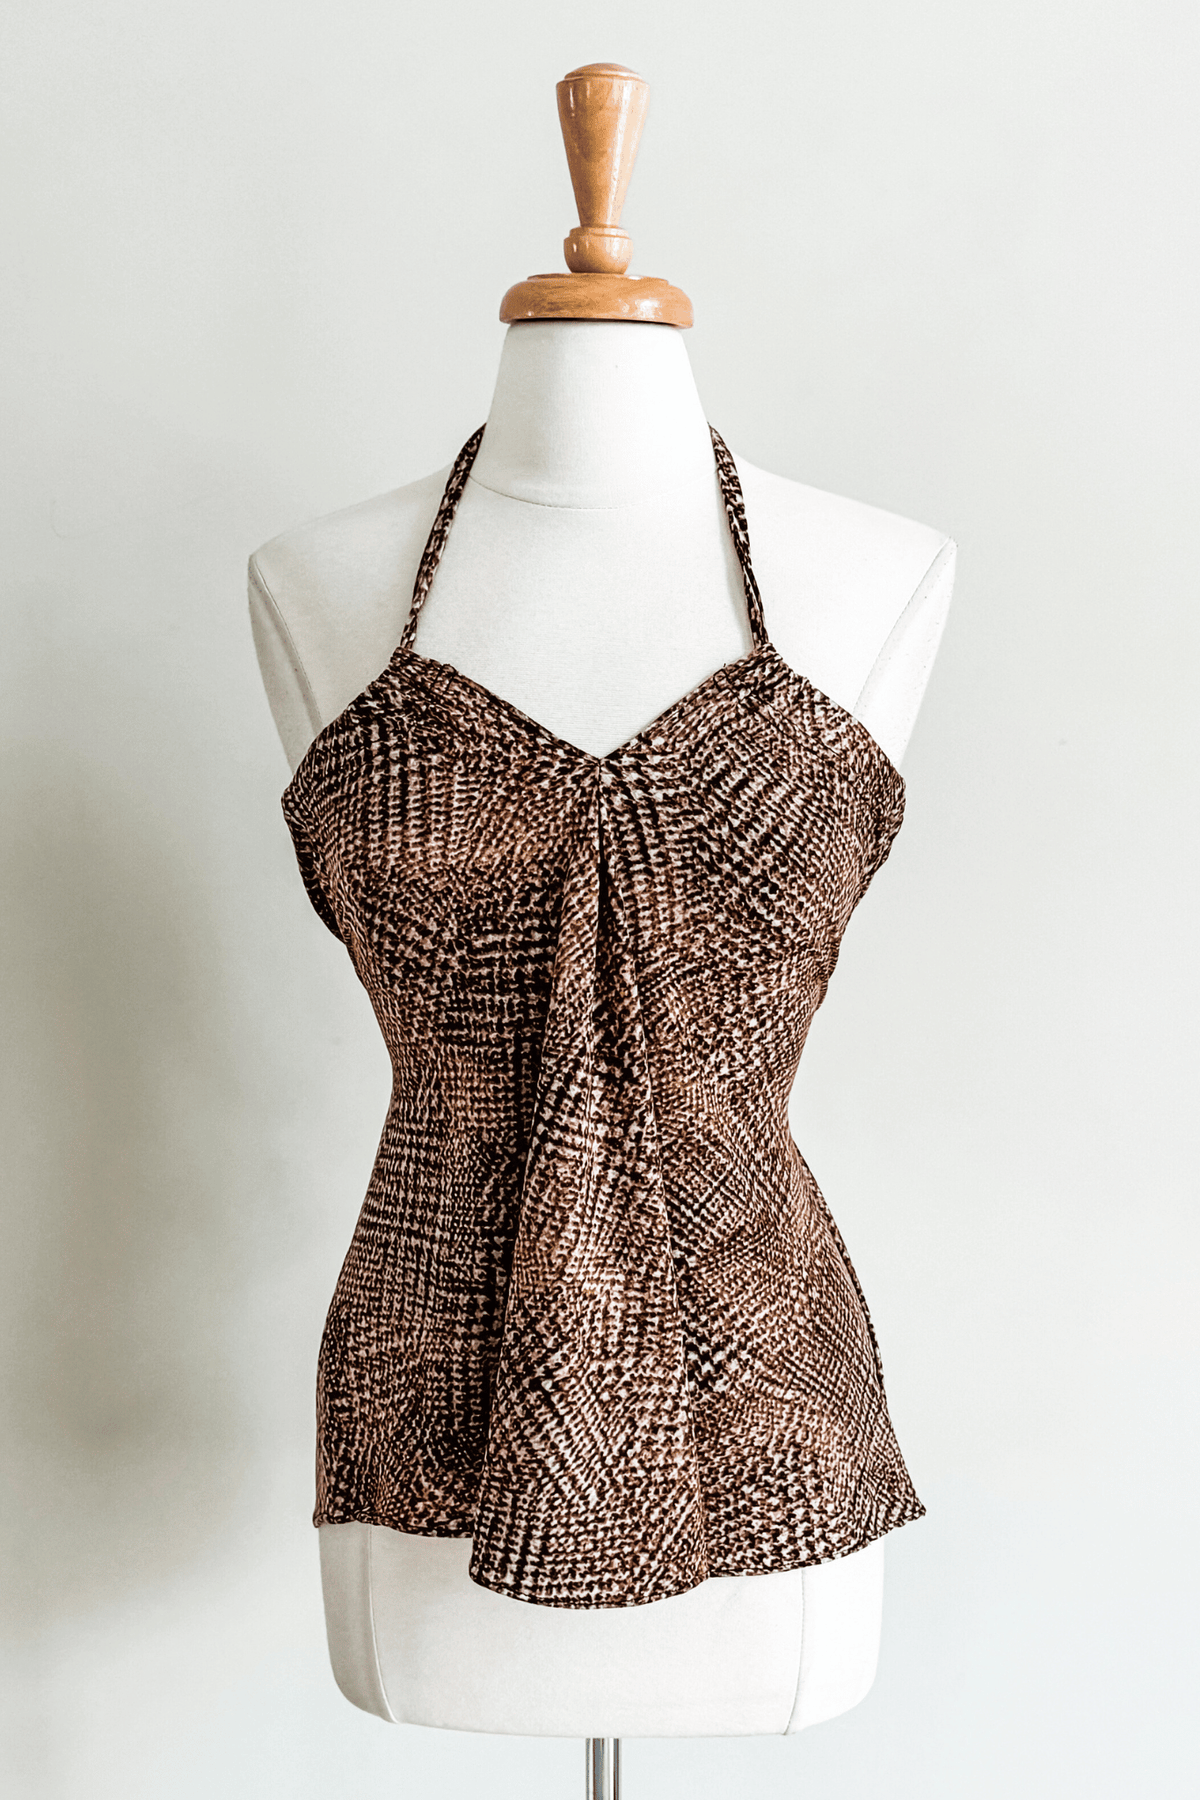 Evermore Top in Clay Snake EcoVero print